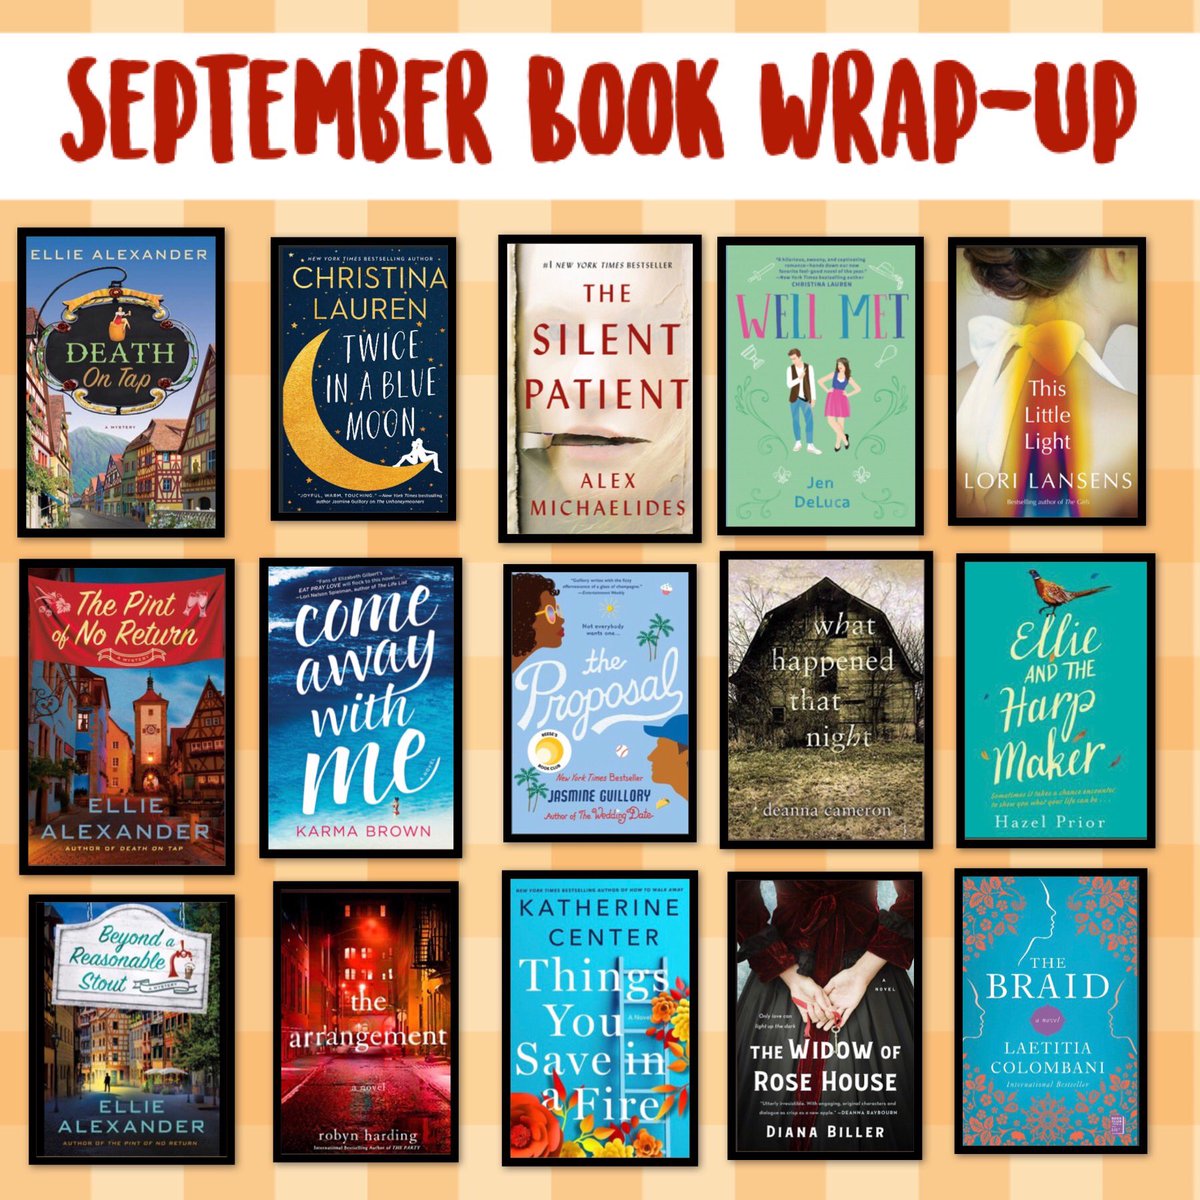 I read a whopping 15 books in September. It was a great month for books. 

These reviews and more can be found on my blog - thebakingbookworm.blogspot.ca

Which were your favourites?

#monthlybookwrapup